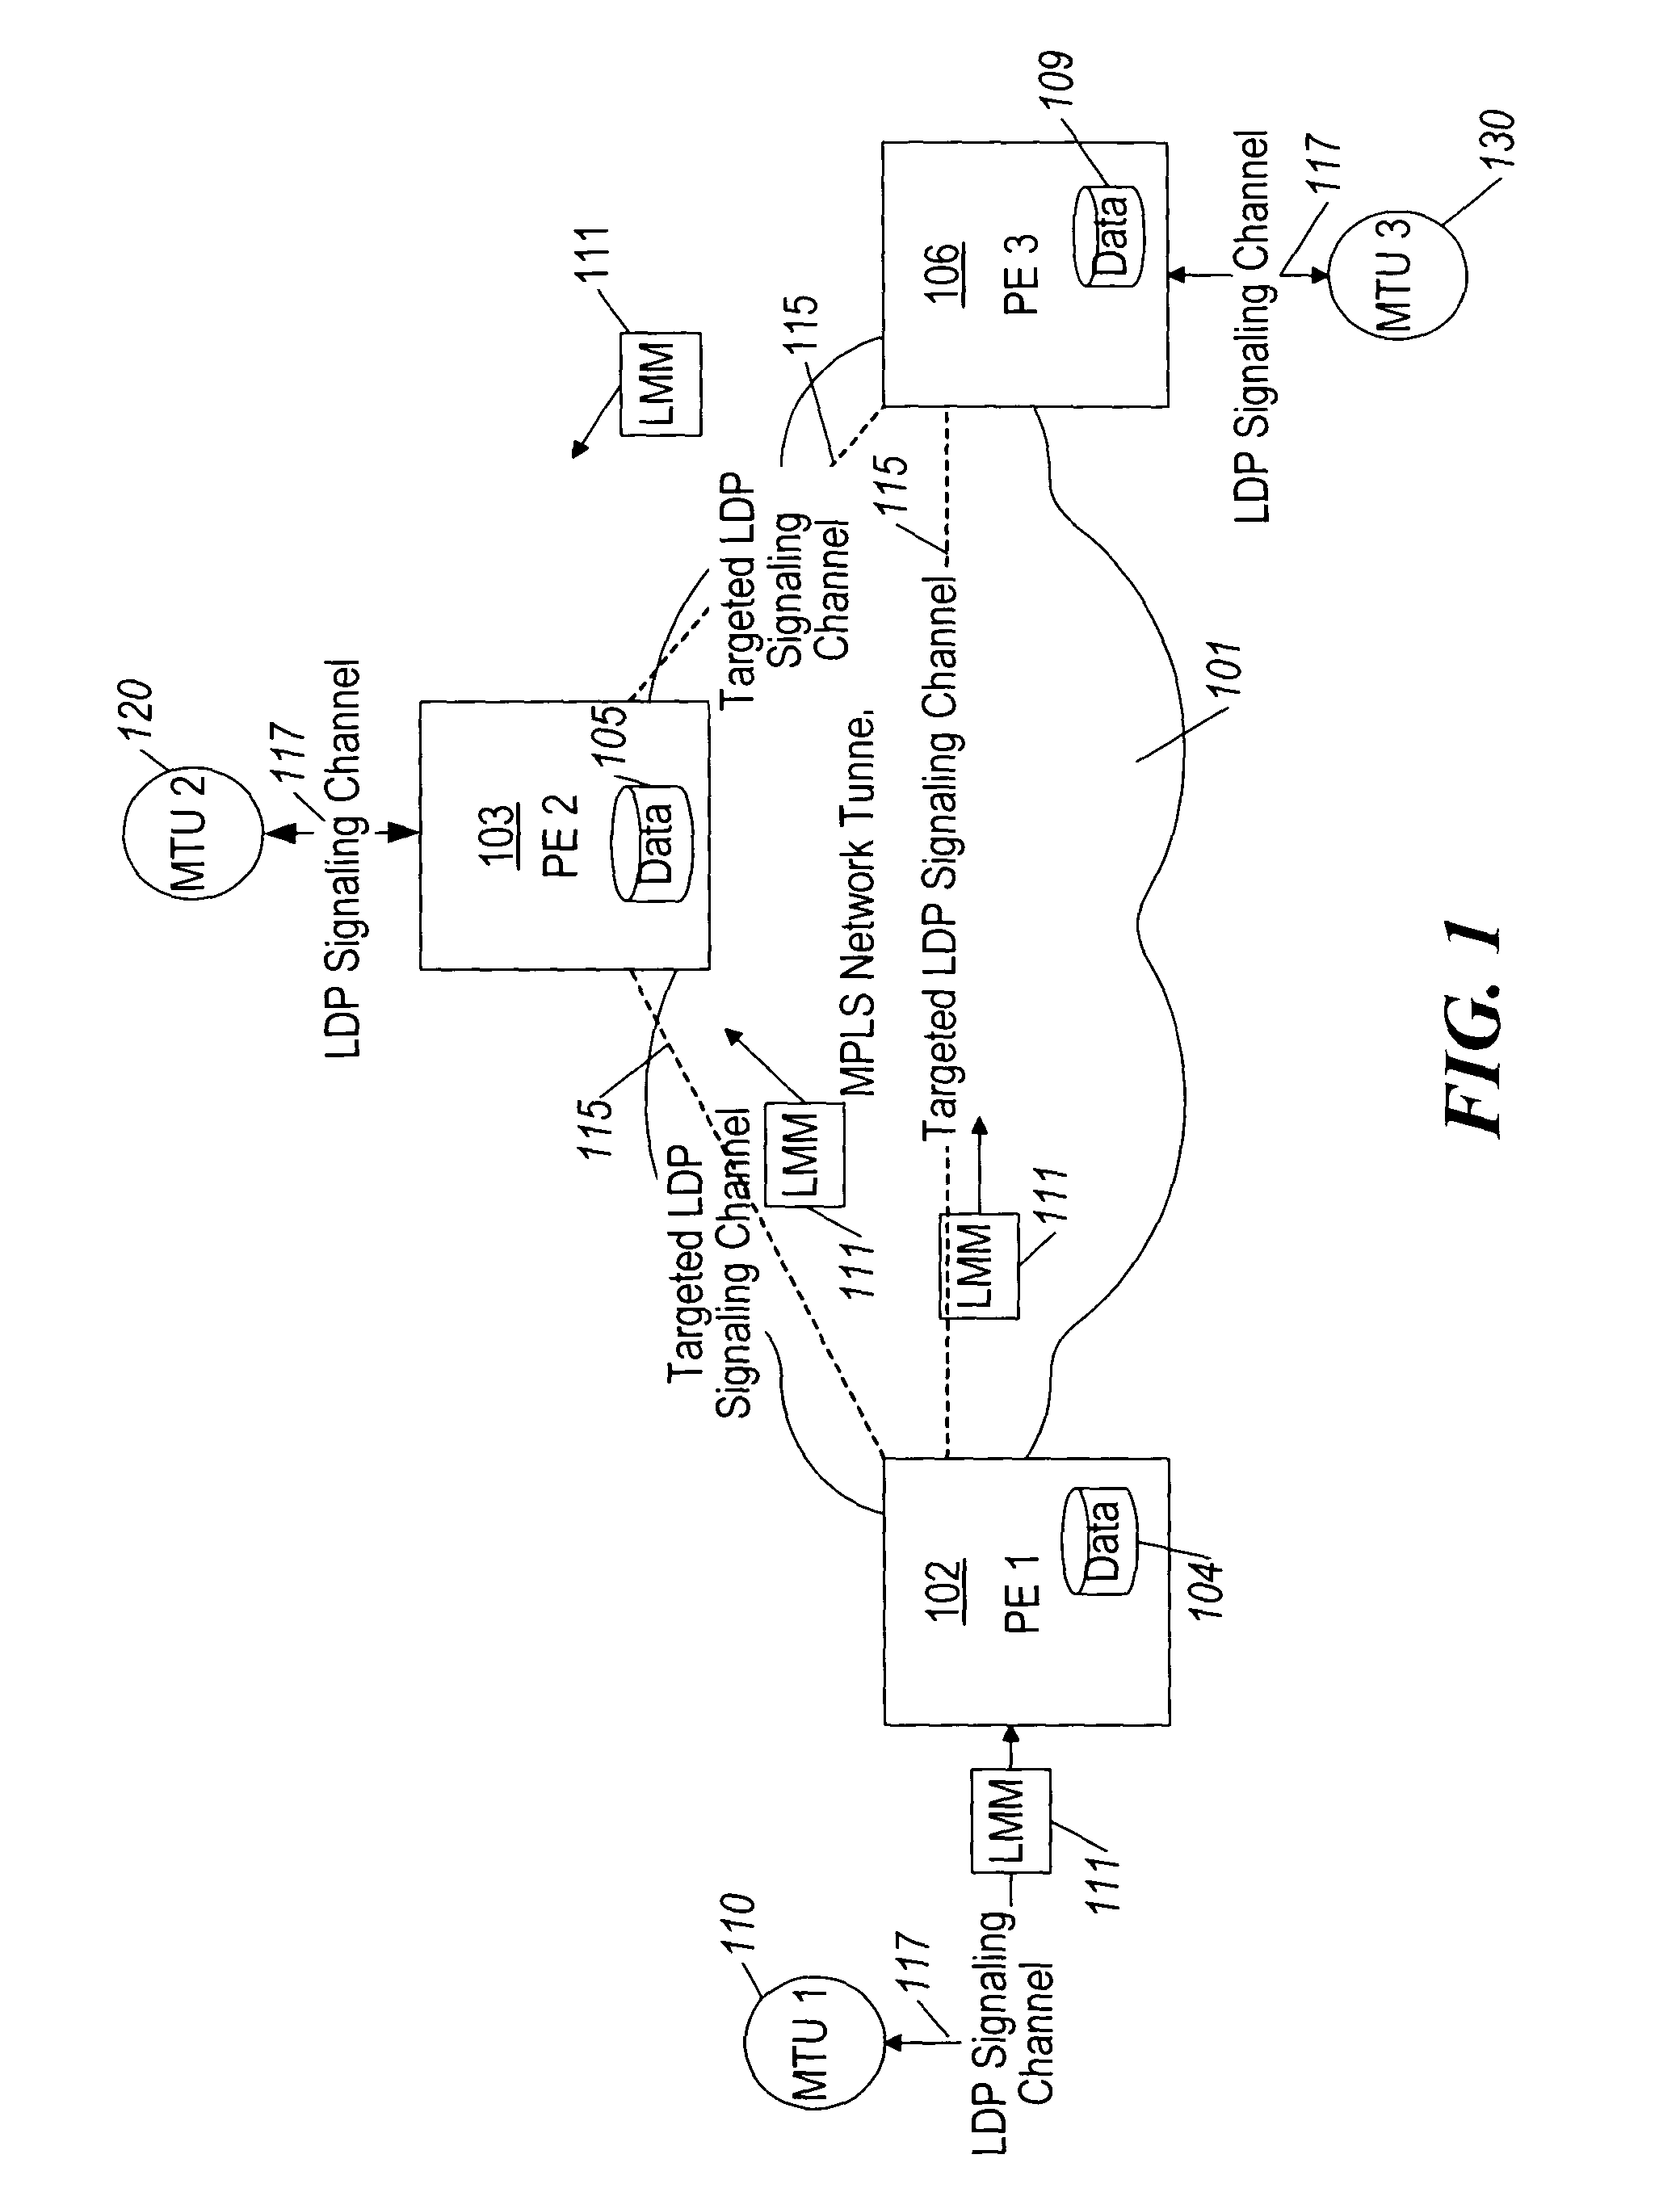 Method and system for automating membership discovery in a distributed computer network